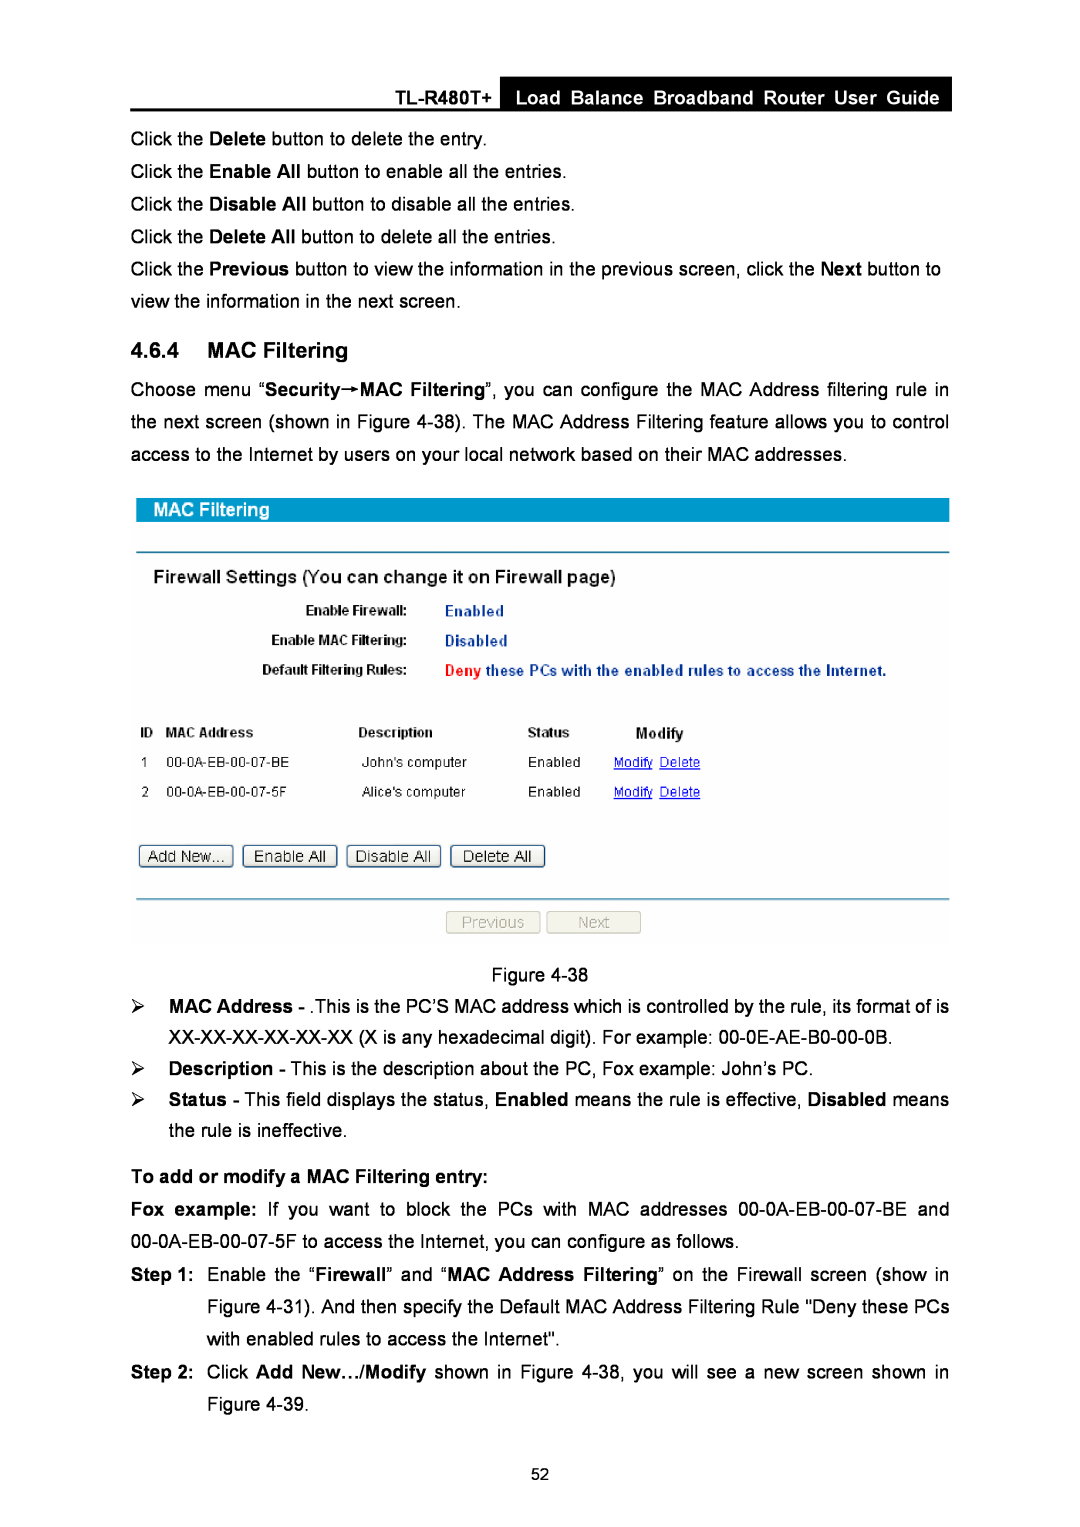 TP-Link TL-R480T+ manual Load Balance Broadband Router User Guide, To add or modify a MAC Filtering entry 